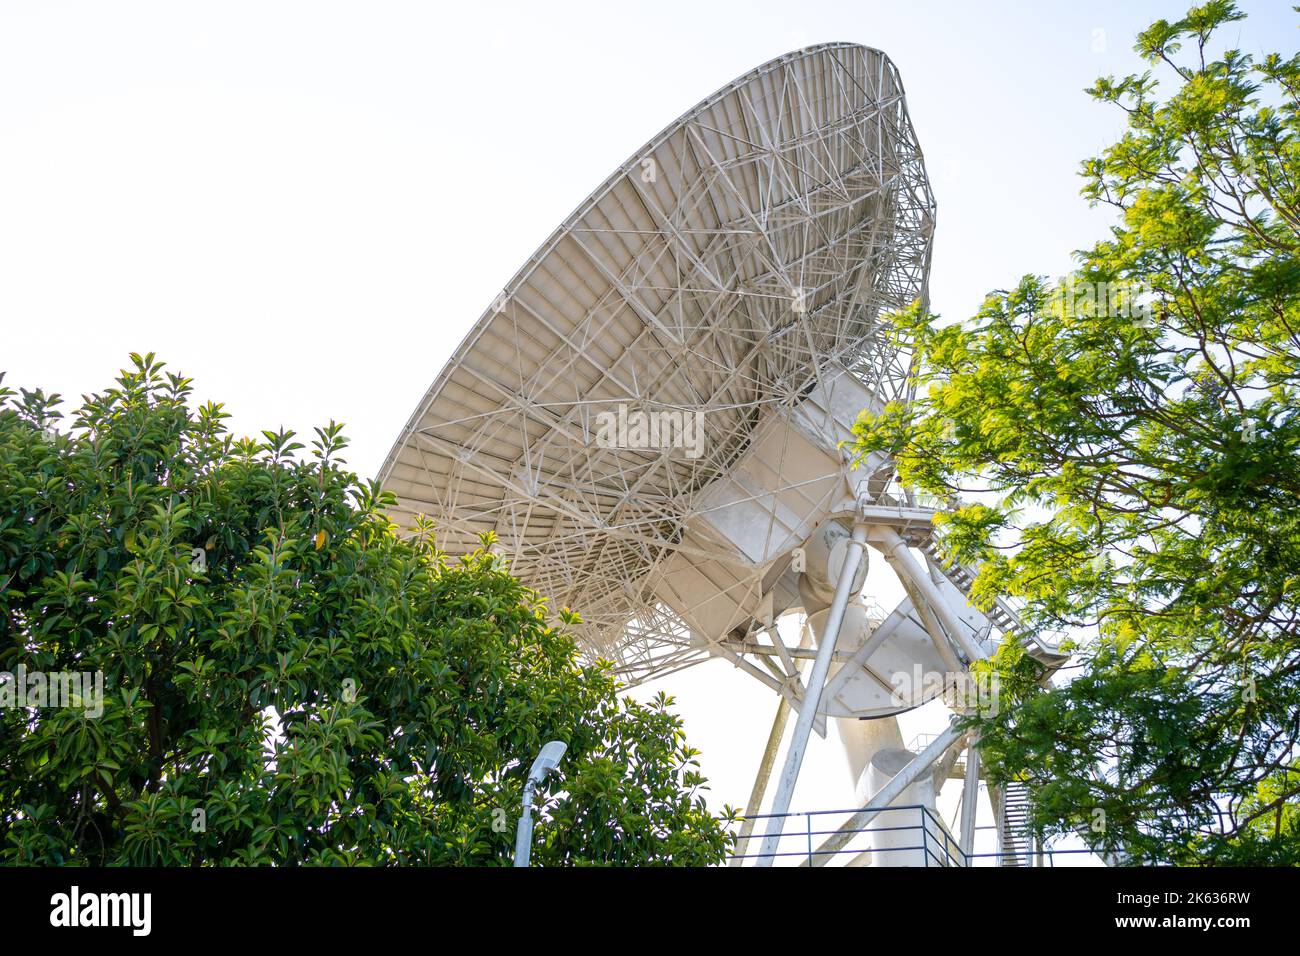 Earth based astronomical radio telescope. Radio telescopes used in science for space observation and distant objects exploring. Stock Photo